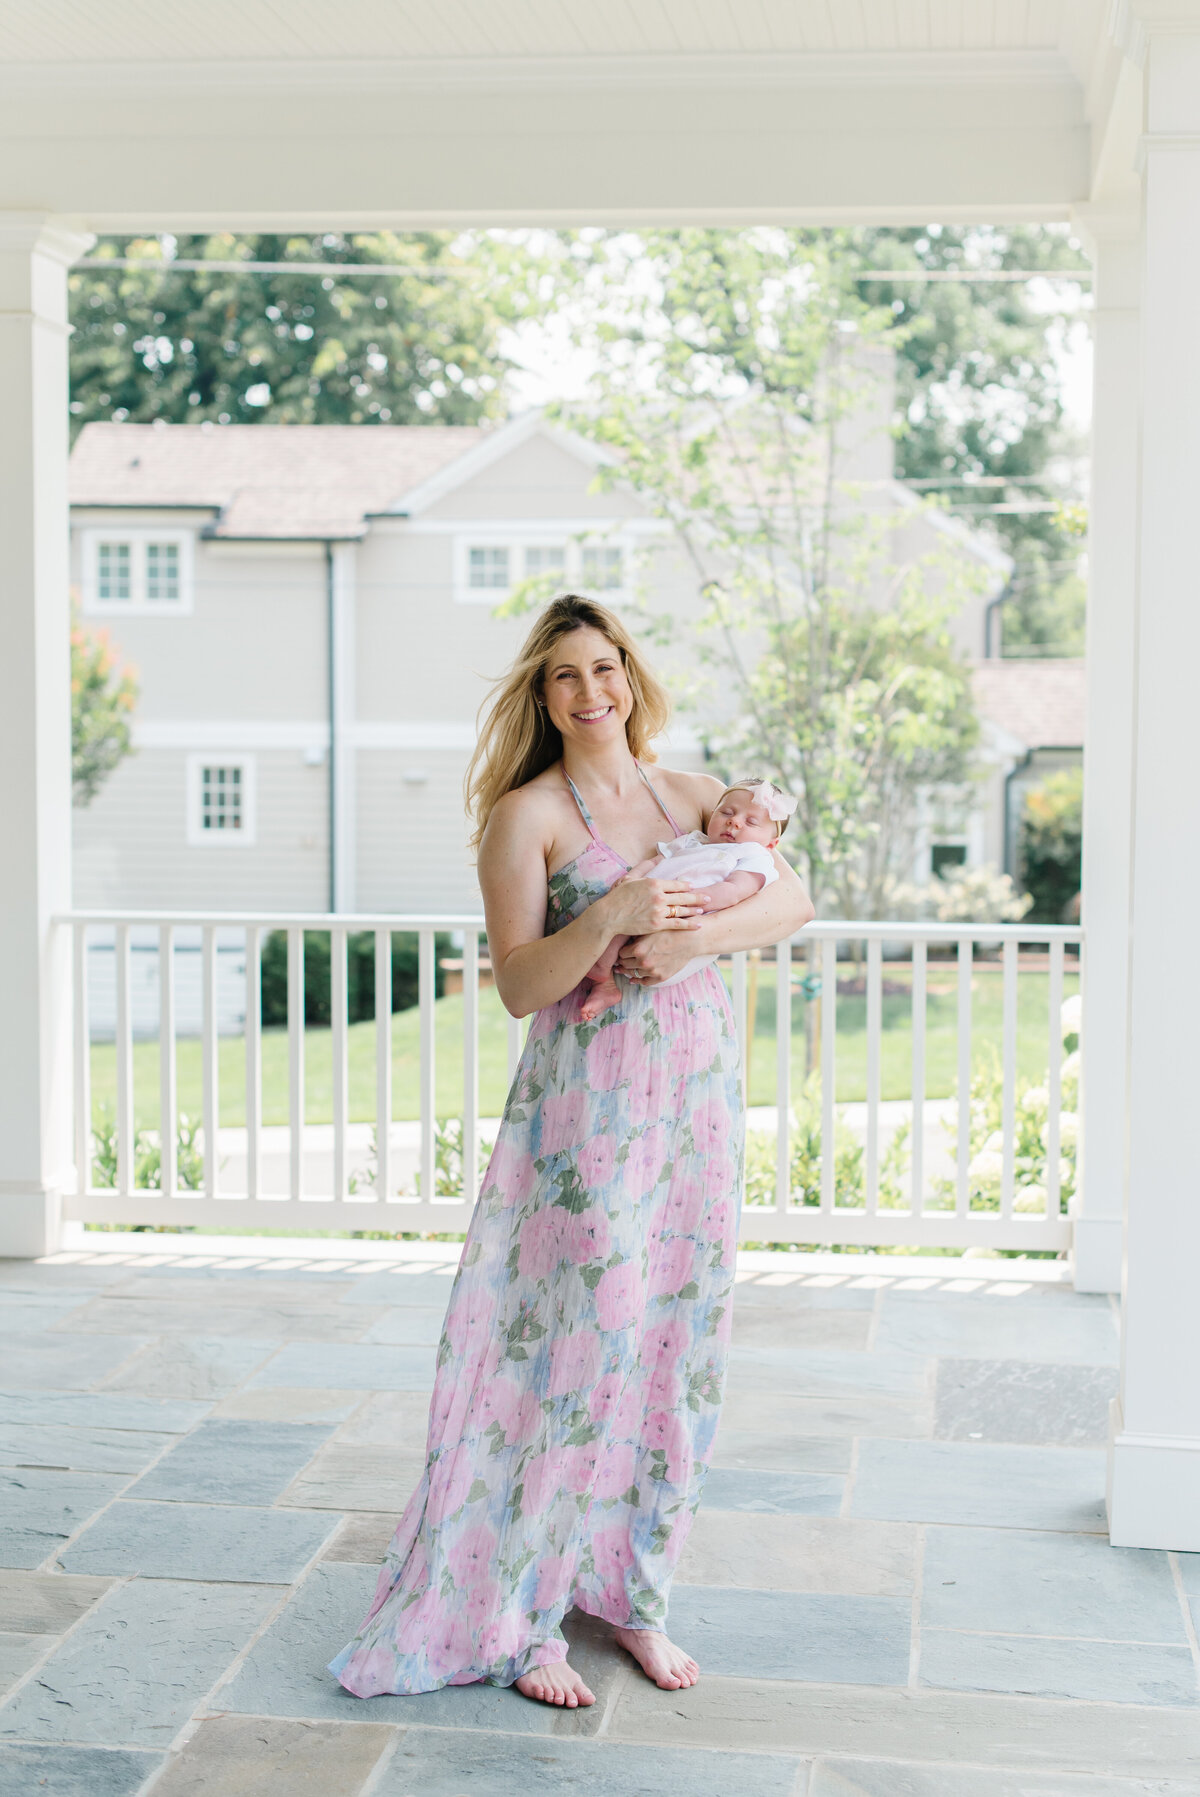 Mother holding baby outside on a porch smiling